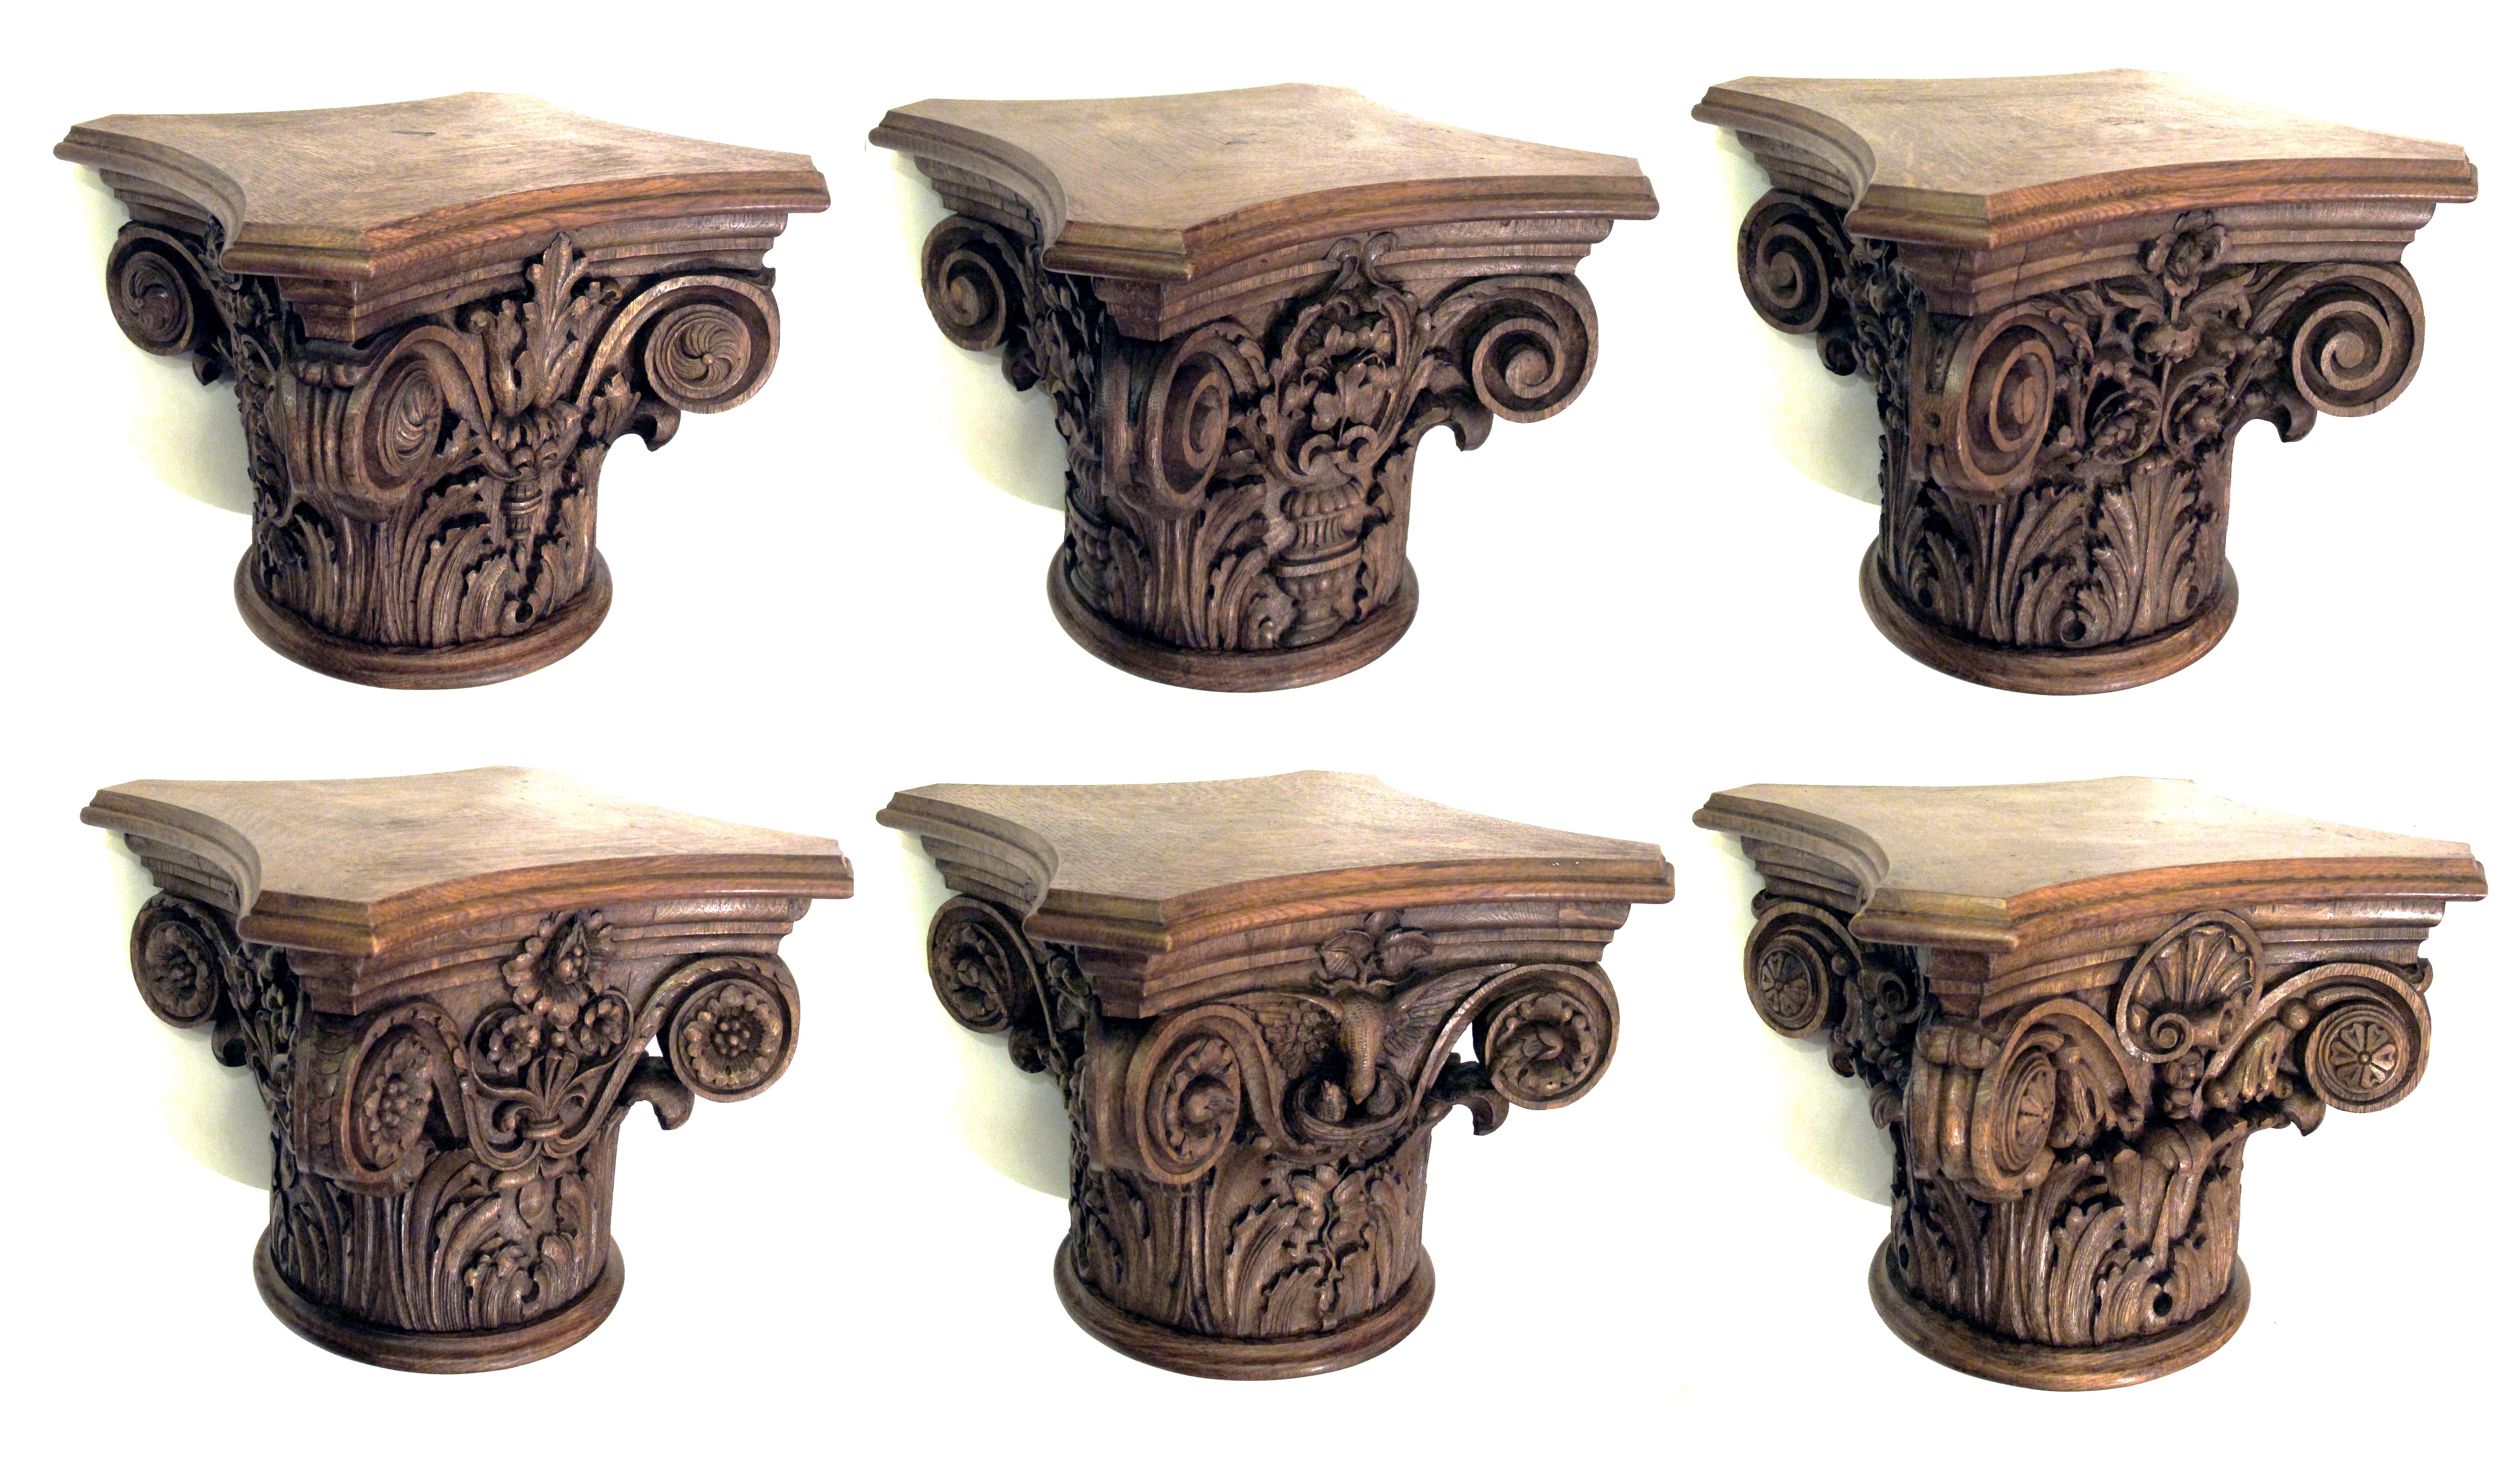 A Finely Carved Set of 6 English Oak Corinthian Capitals